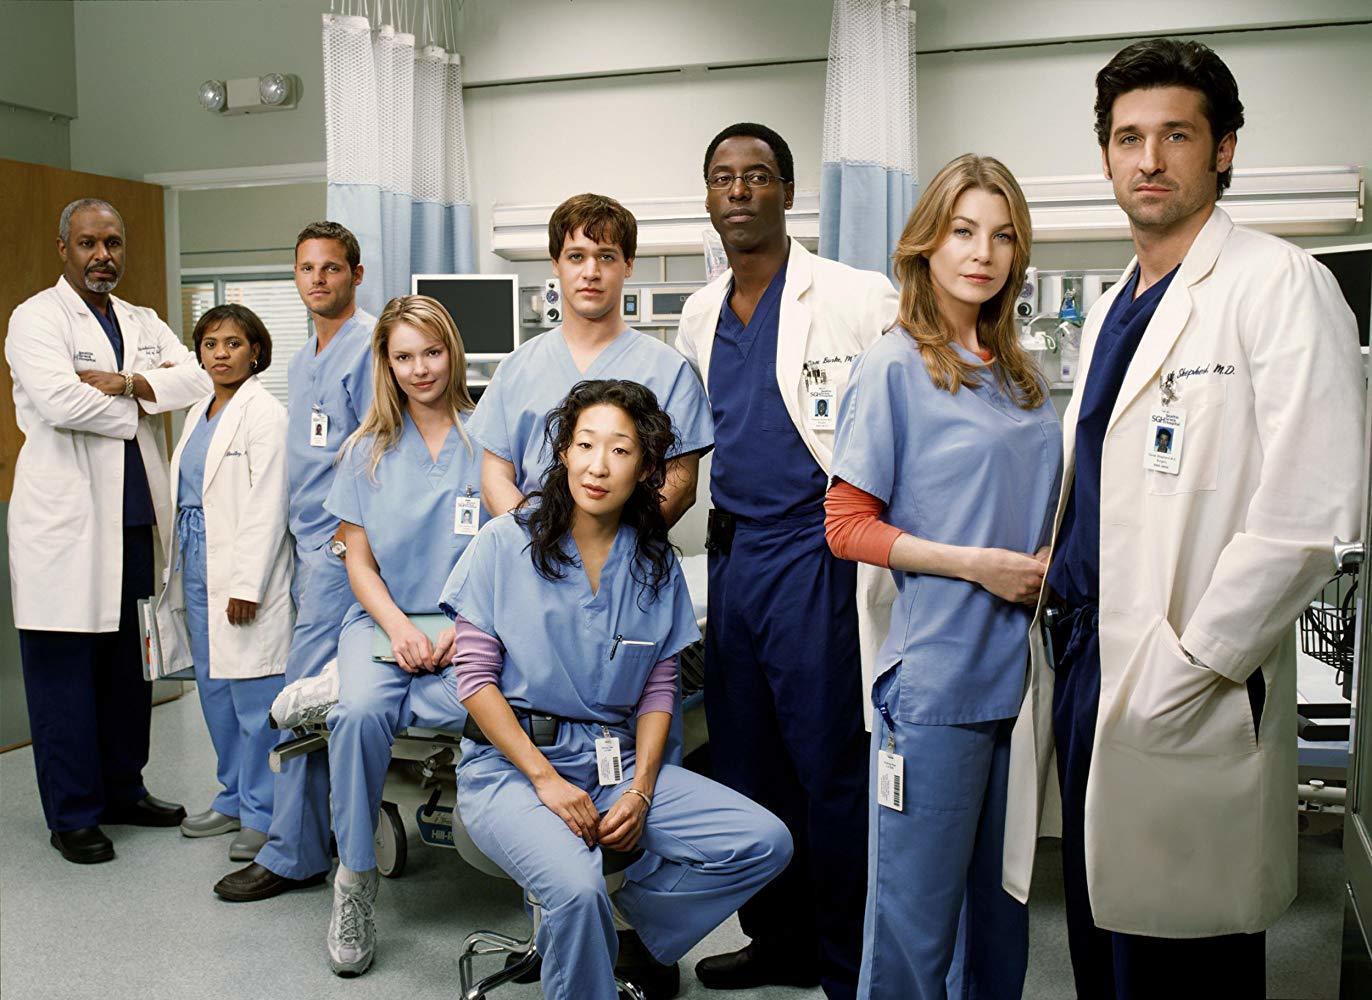 <p><a href="https://abc.com/shows/greys-anatomy"><em>Grey’s Anatomy</em></a>, with its focus on its characters’ tumultuous love lives and its seemingly endless seasons, is a medical drama TV series that many fans love to hate-watch.</p>